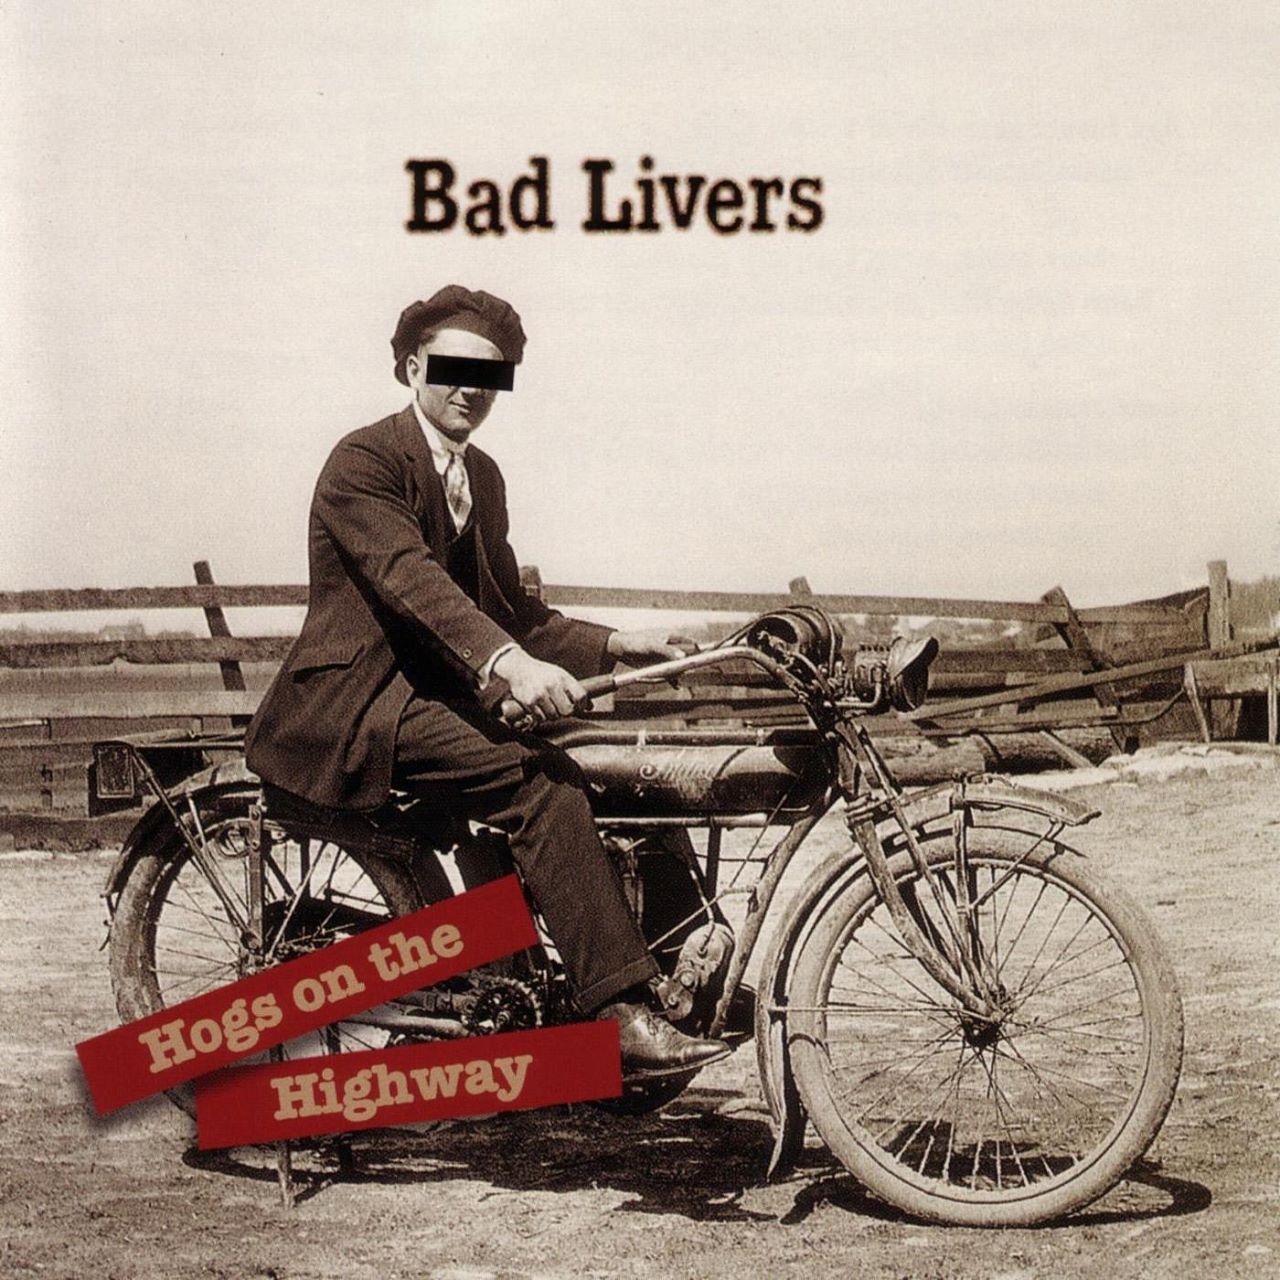 Bad Livers - Hogs On The Highway cover album